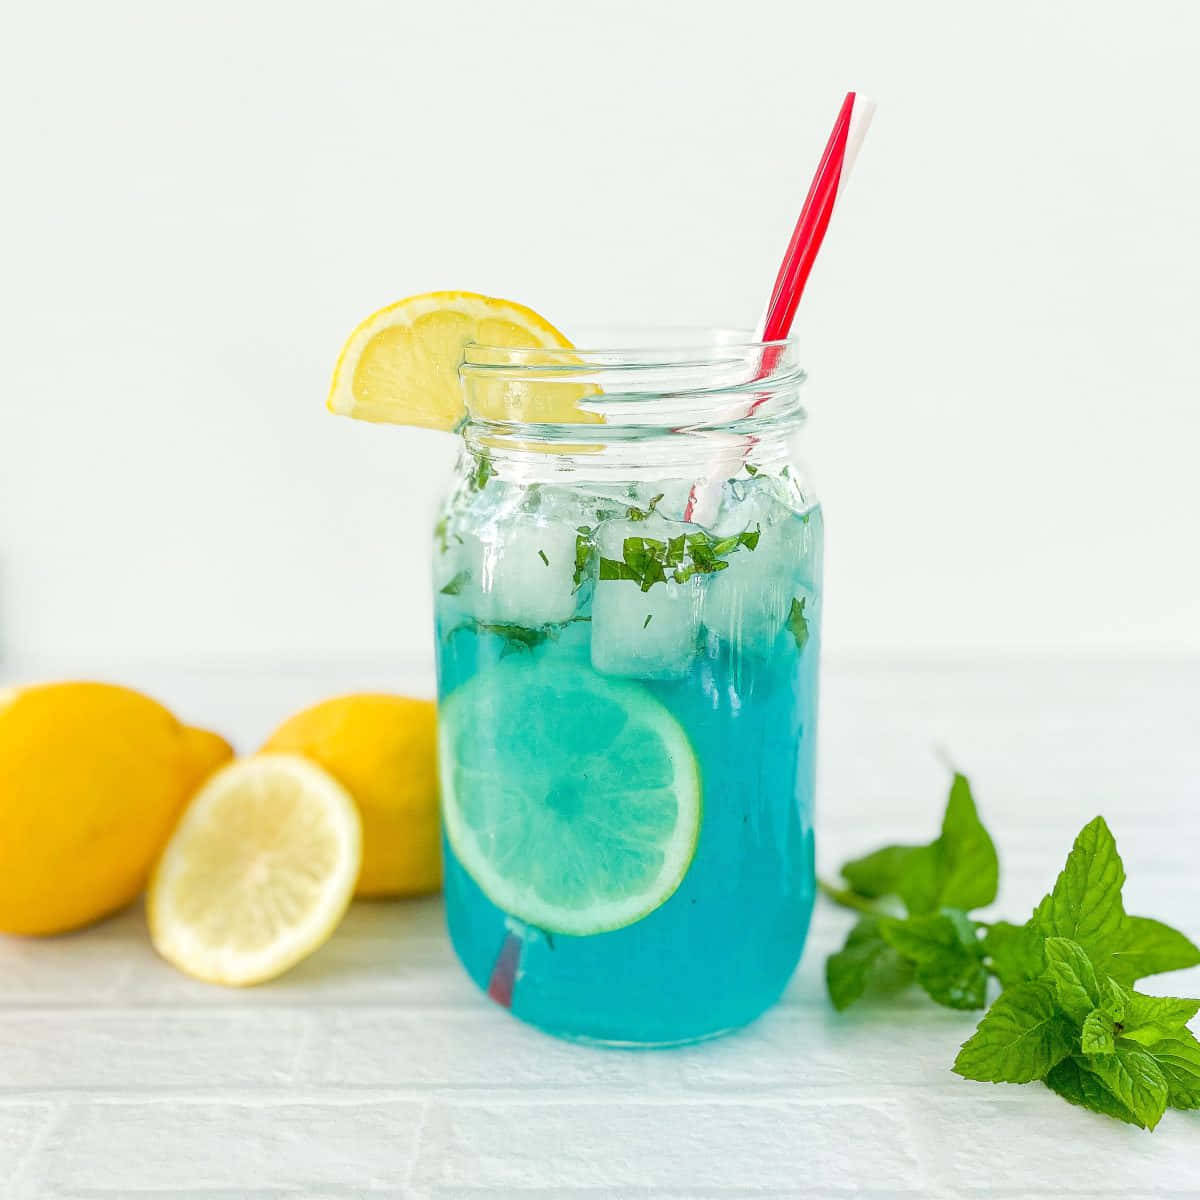 A Blue Drink With Lemon And Mint Leaves